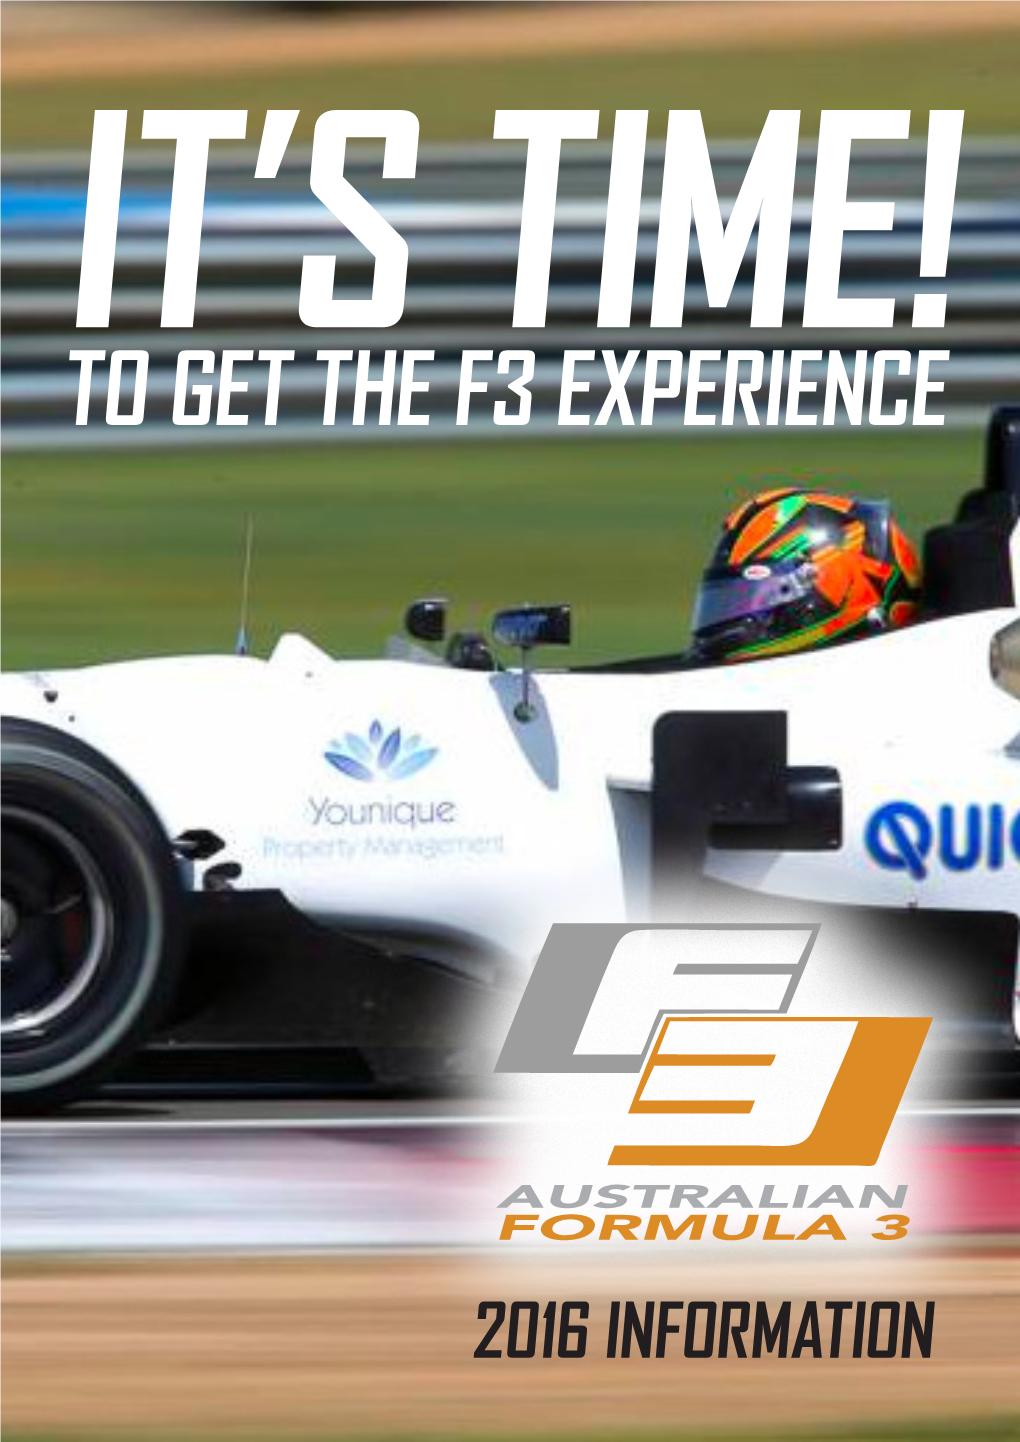 To Get the F3 Experience